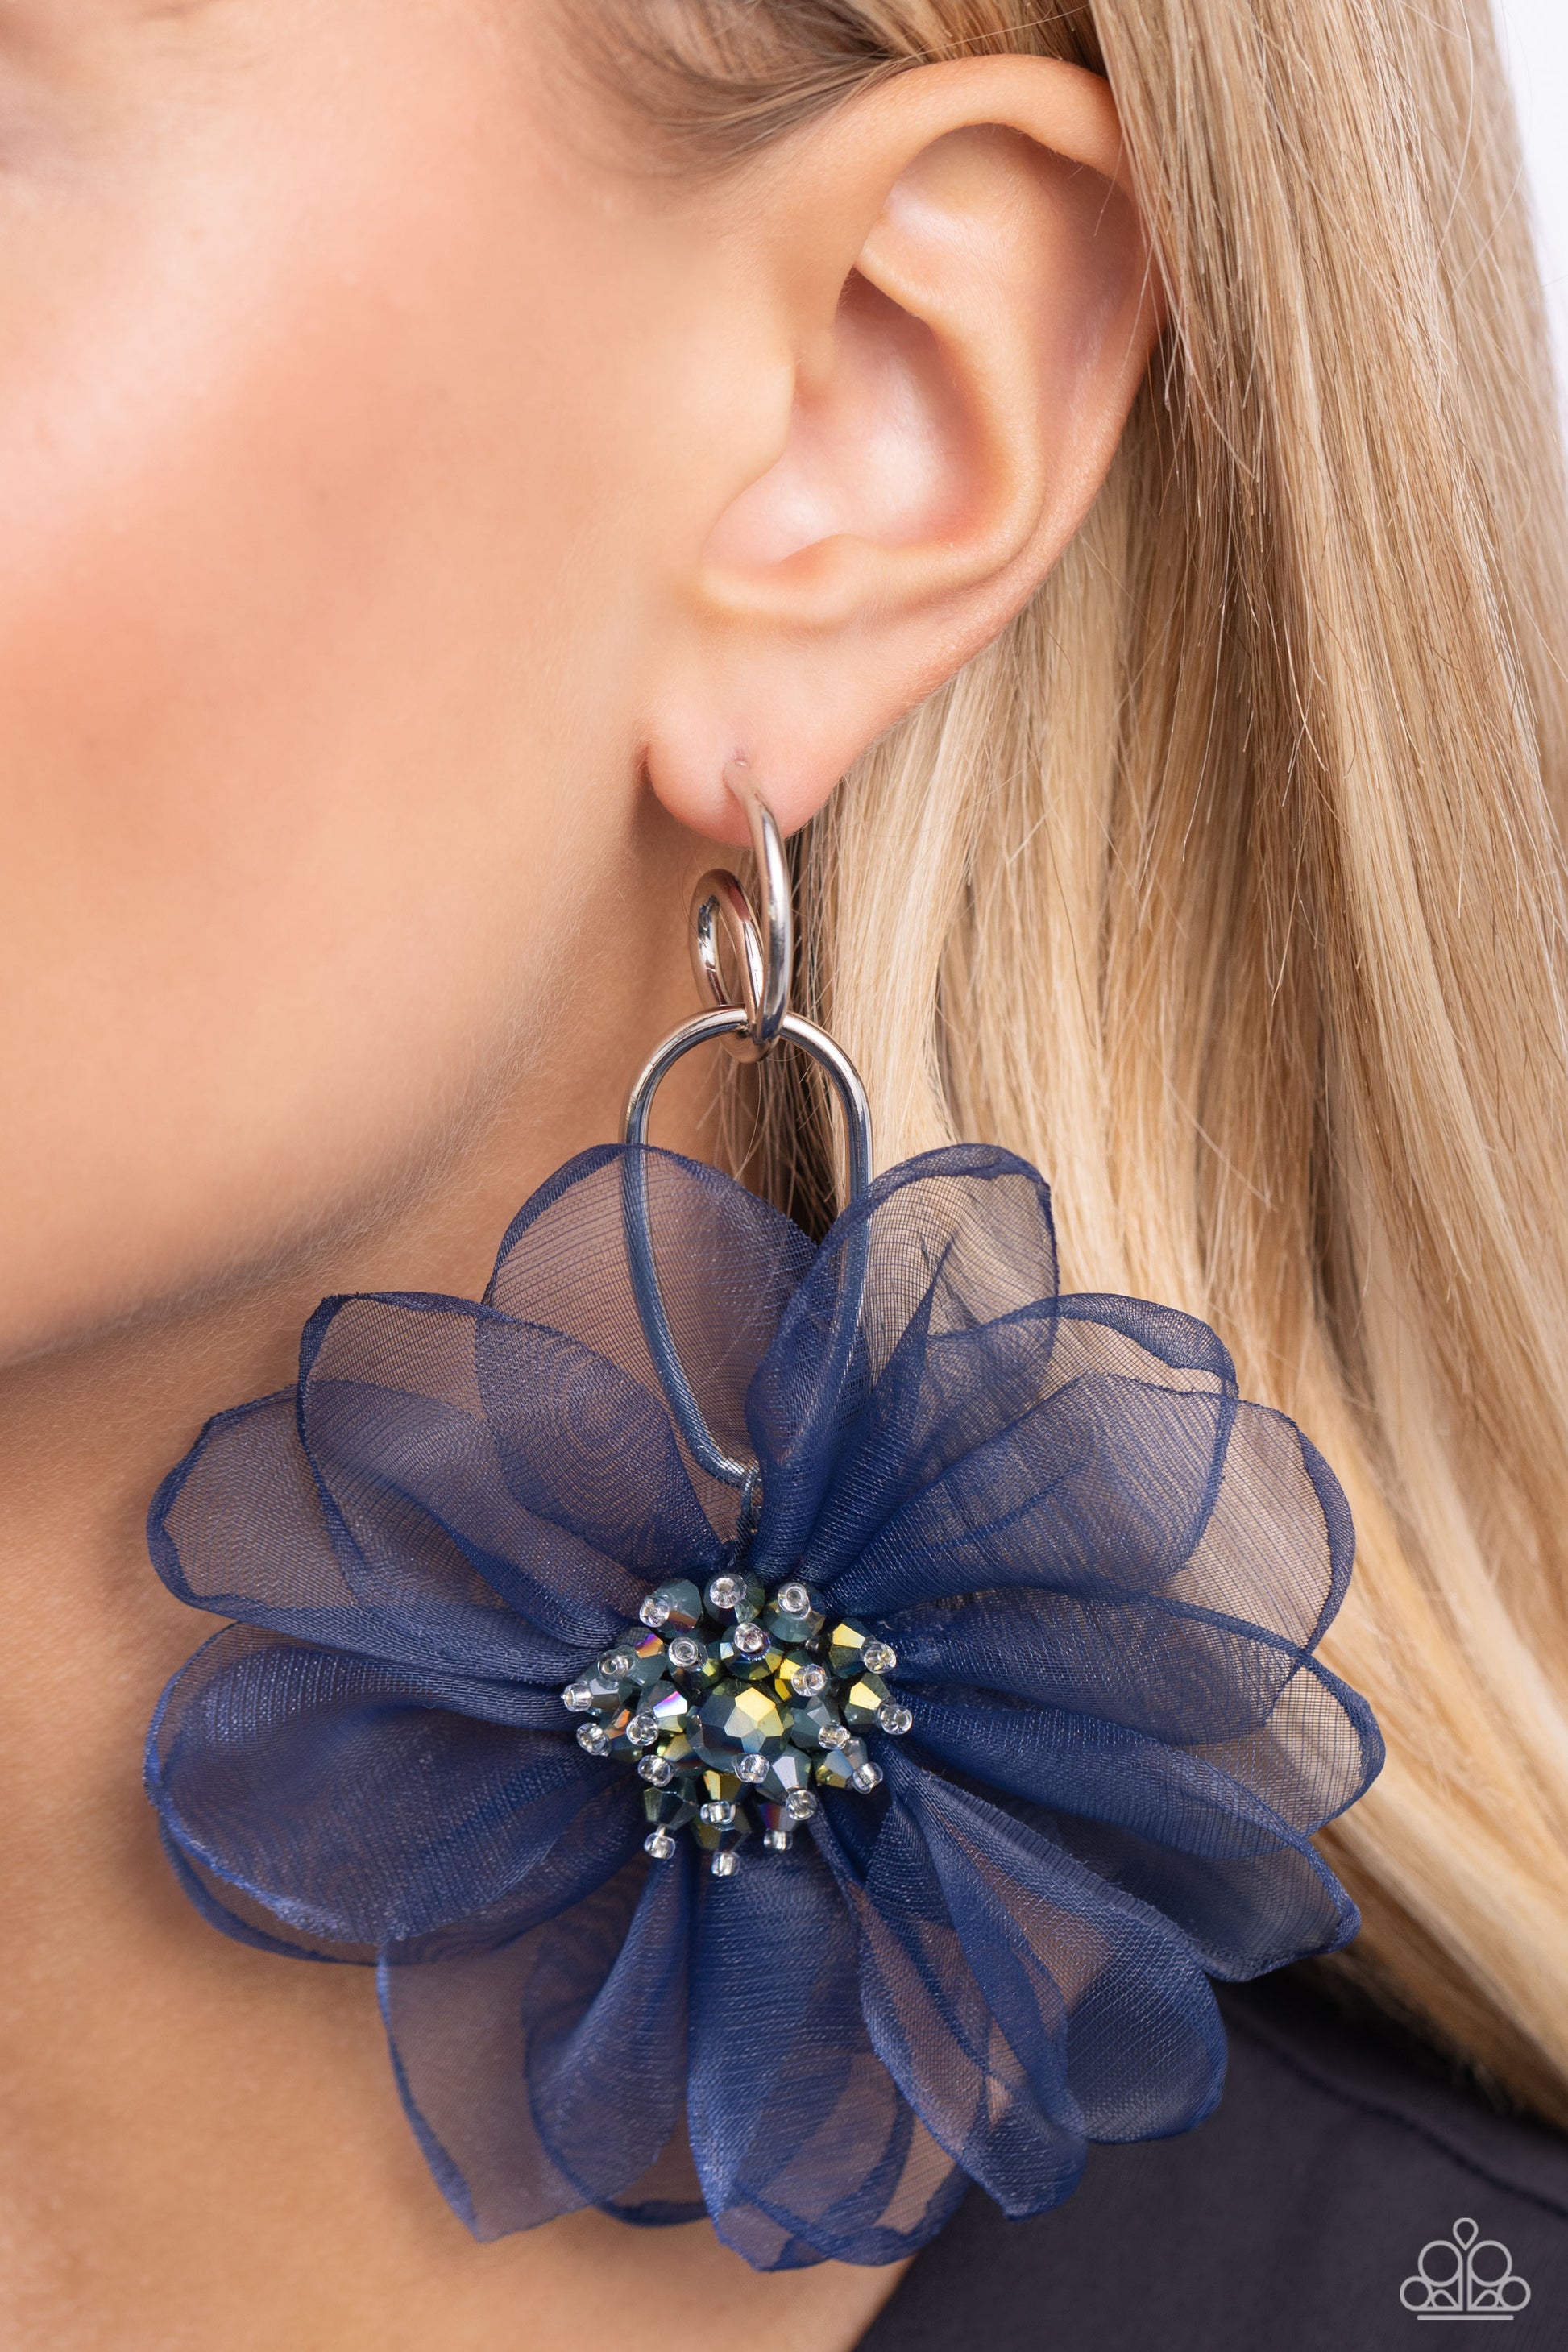 Paparazzi Accessories - Cosmopolitan Chiffon - Blue Earringthat duo of asymmetrical silver hoops link as they tumble from the ear, coalescing into an abstract lure. Attached to the bottom of the elongated display, oversized navy chiffon petals bloom around oil spill-tinted beads, creating a fantastical floral frenzy. Earring attaches to a standard post fitting. Hoop measures approximately 1" in diameter.  Sold as one pair of hoop earrings.